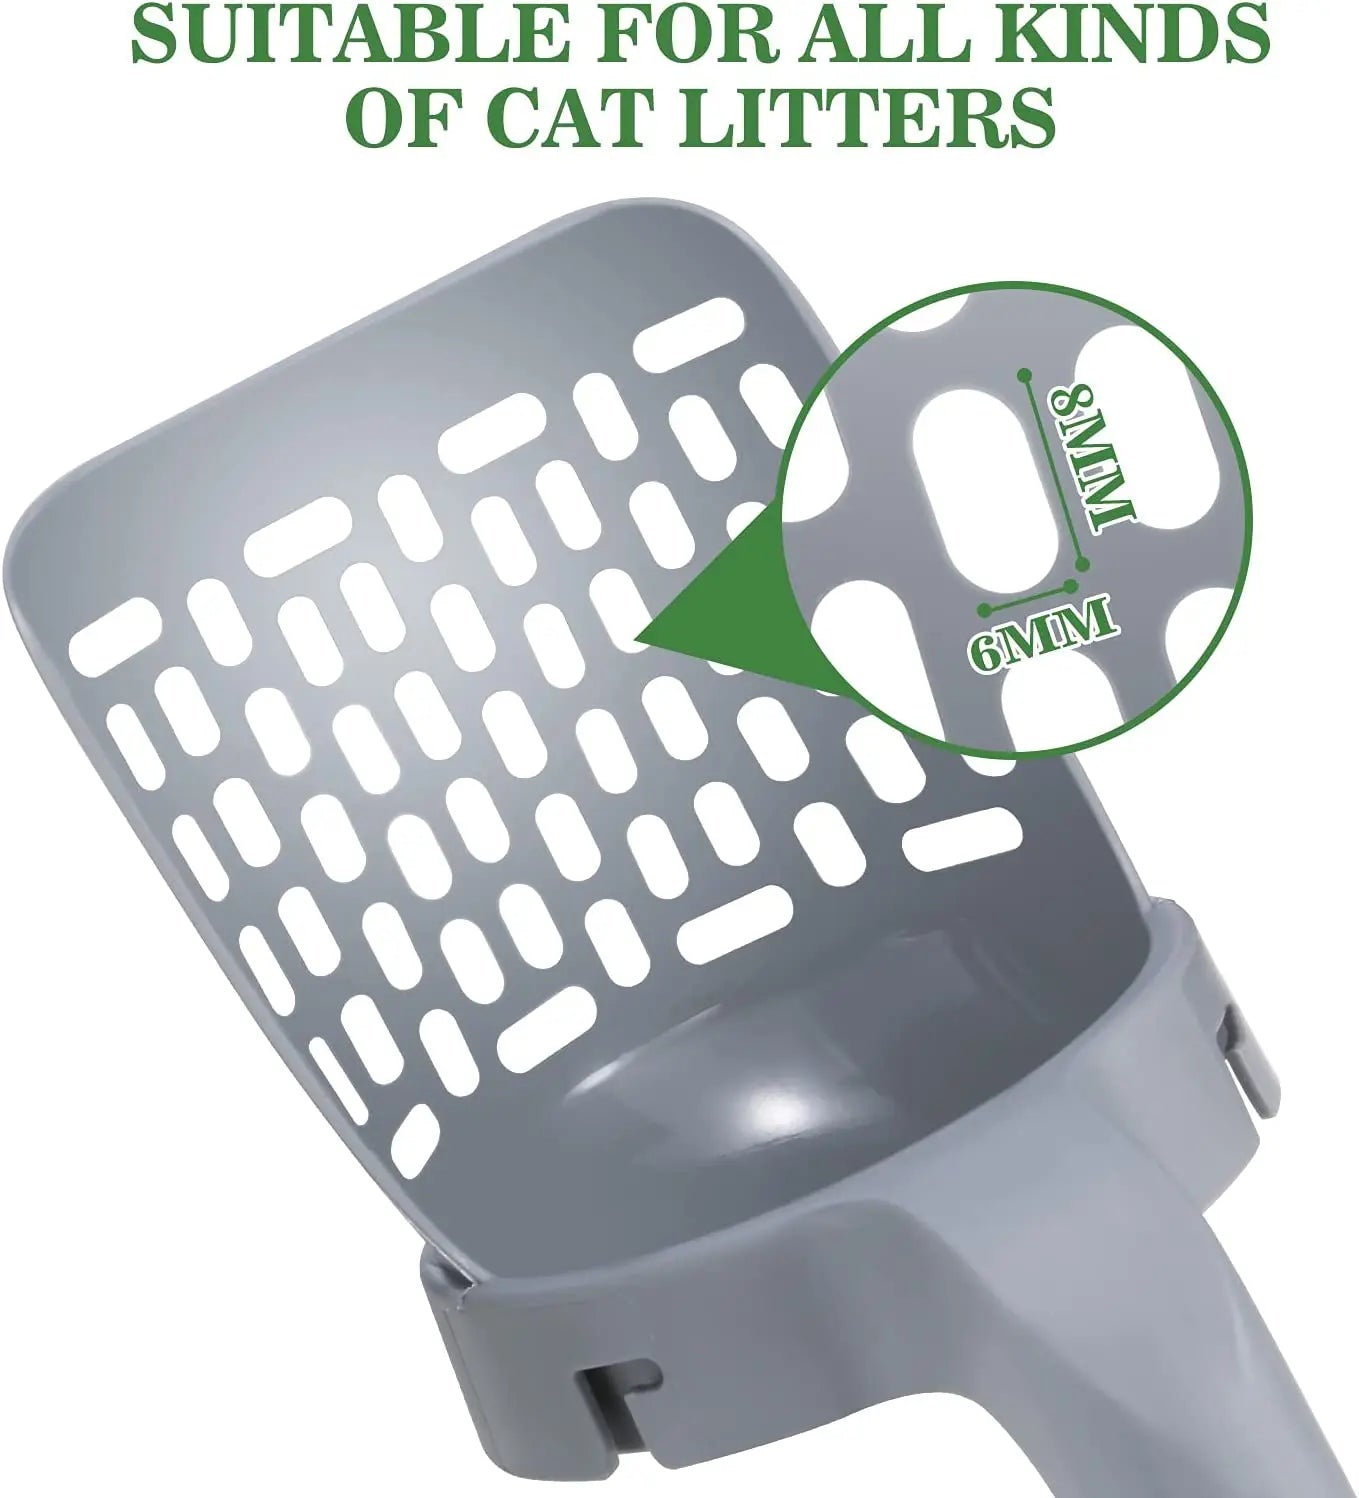 Cat Litter Scoop with bag refill